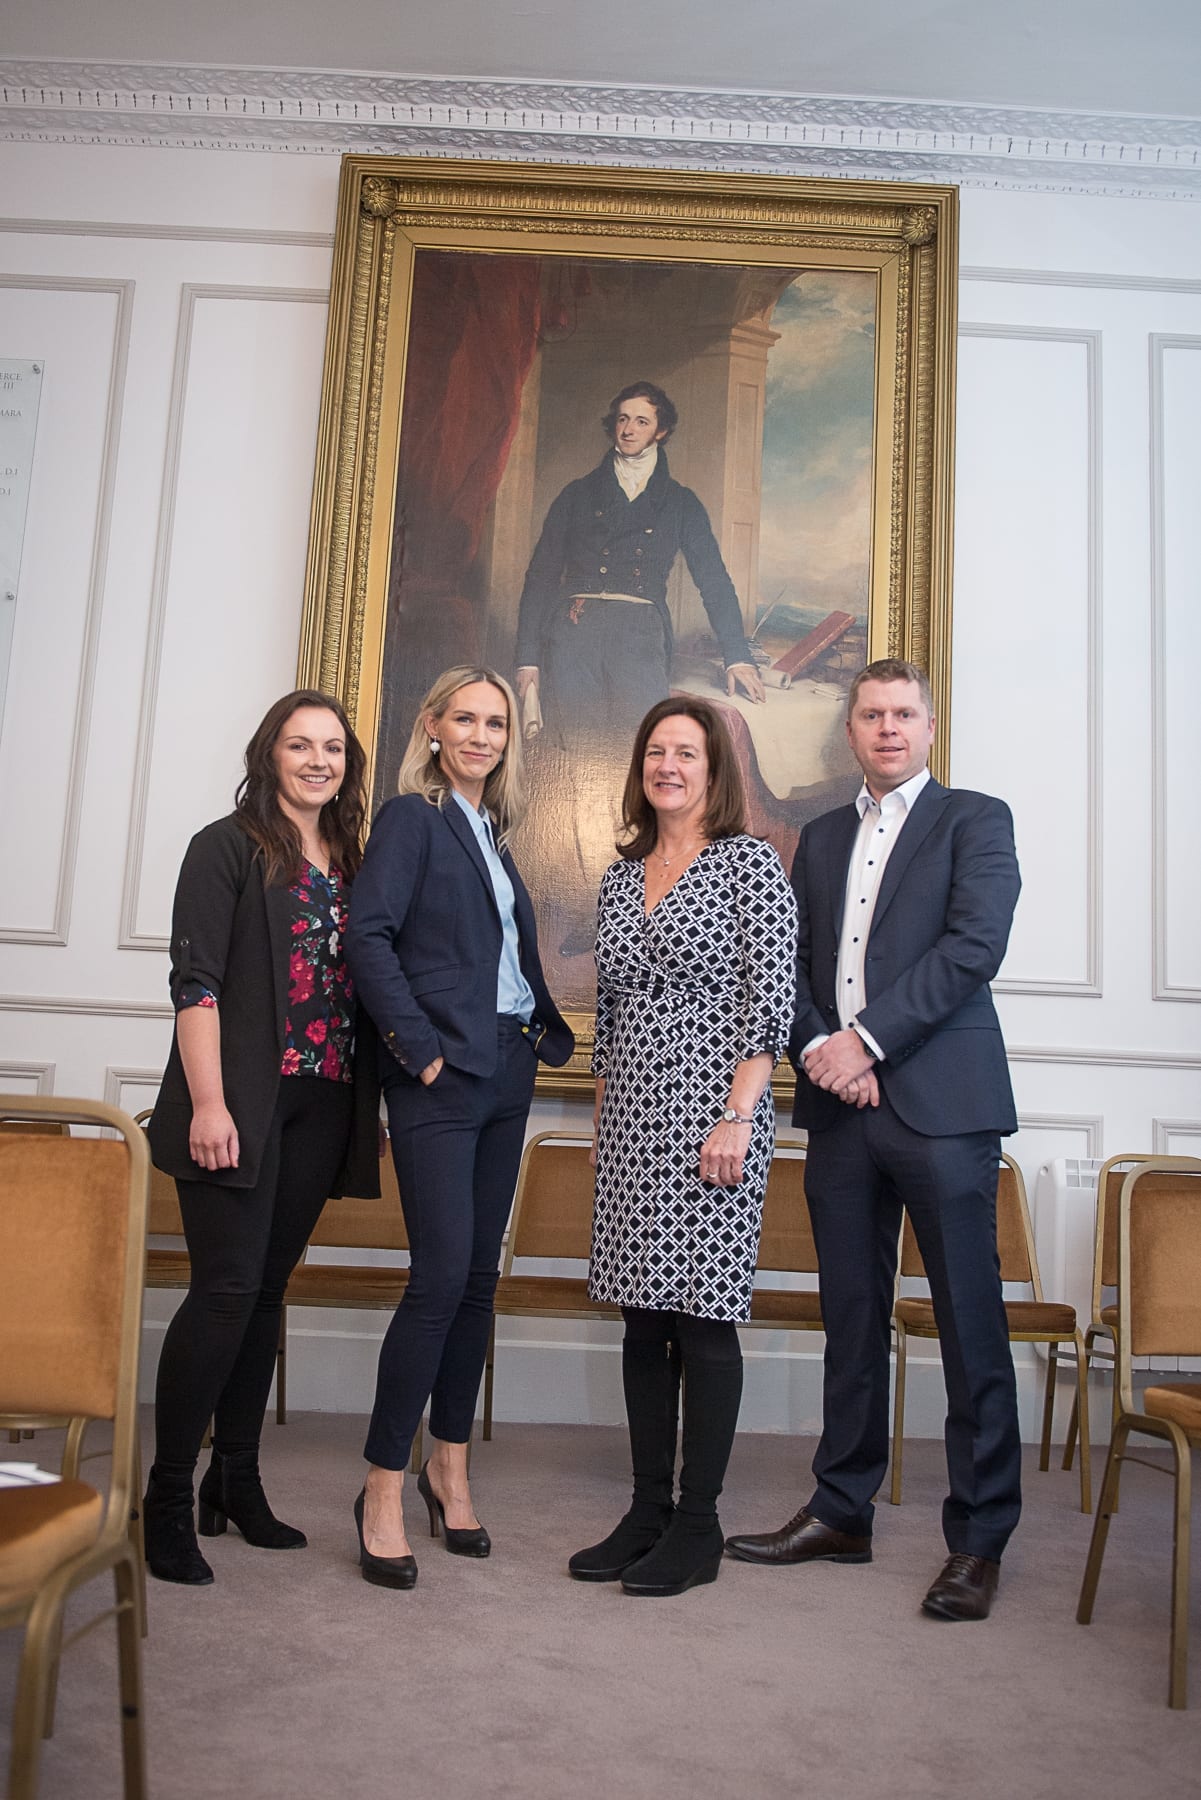 Limerick Chamber AGM which took place in the Limerick Chamber Boardroom on Tuesday 27th Feb 2019:  From left to right: Dr Catriona Cahill - Economist Limerick Chamber, Deirdre Ryan - CEO Limerick Chamber, Dr Mary Shire - Outgoing President Limerick Chamber, Eoin Ryan - Incoming President Limerick Chamber, 
Image by Morning Star Photography